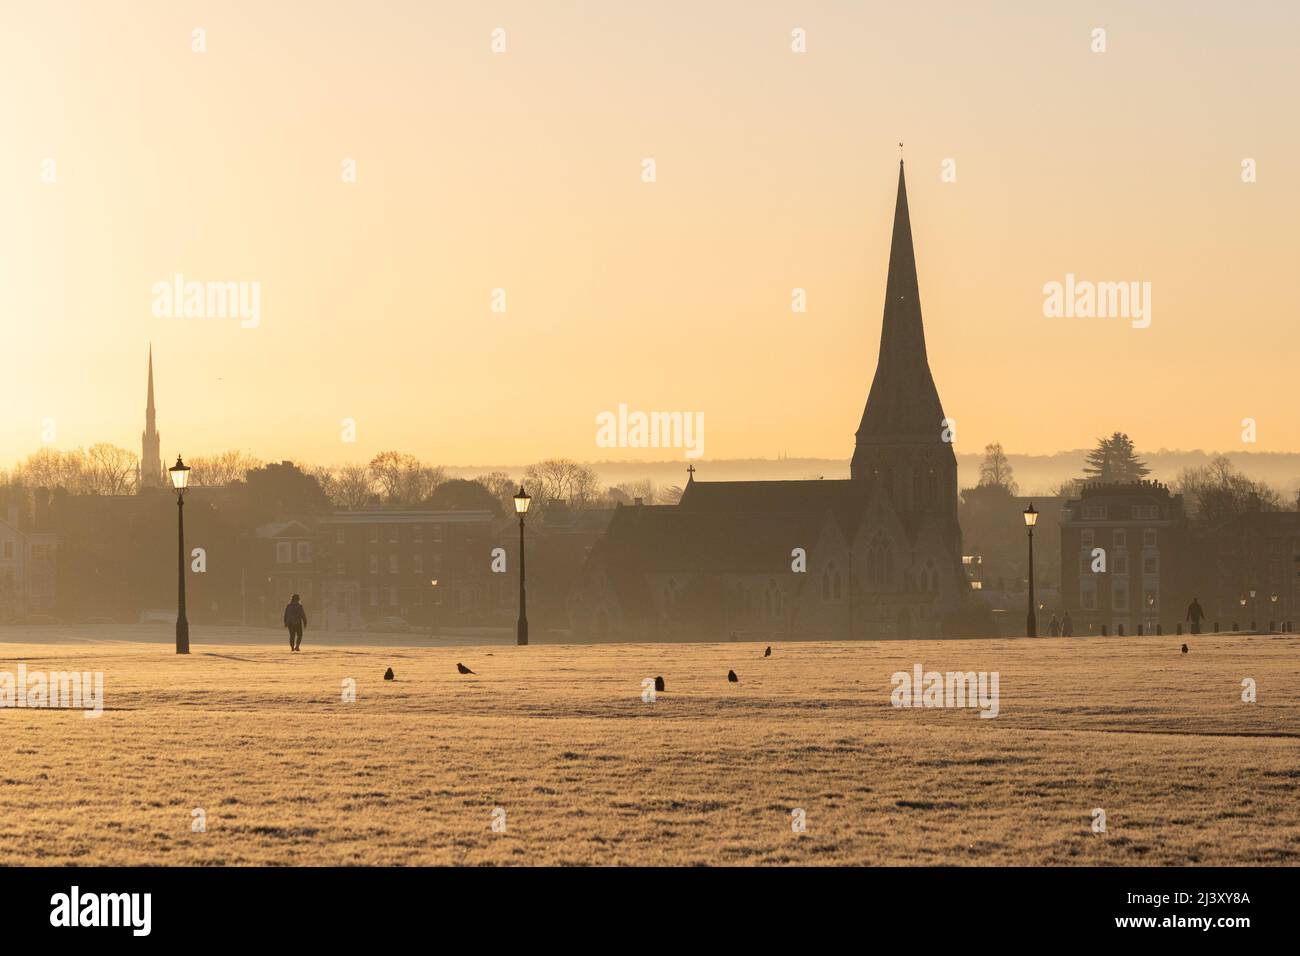 A view of Blackheath Common in the winter during a warm sunset. All Saints church can be seen in the distance and people can be seen walking. Stock Photo